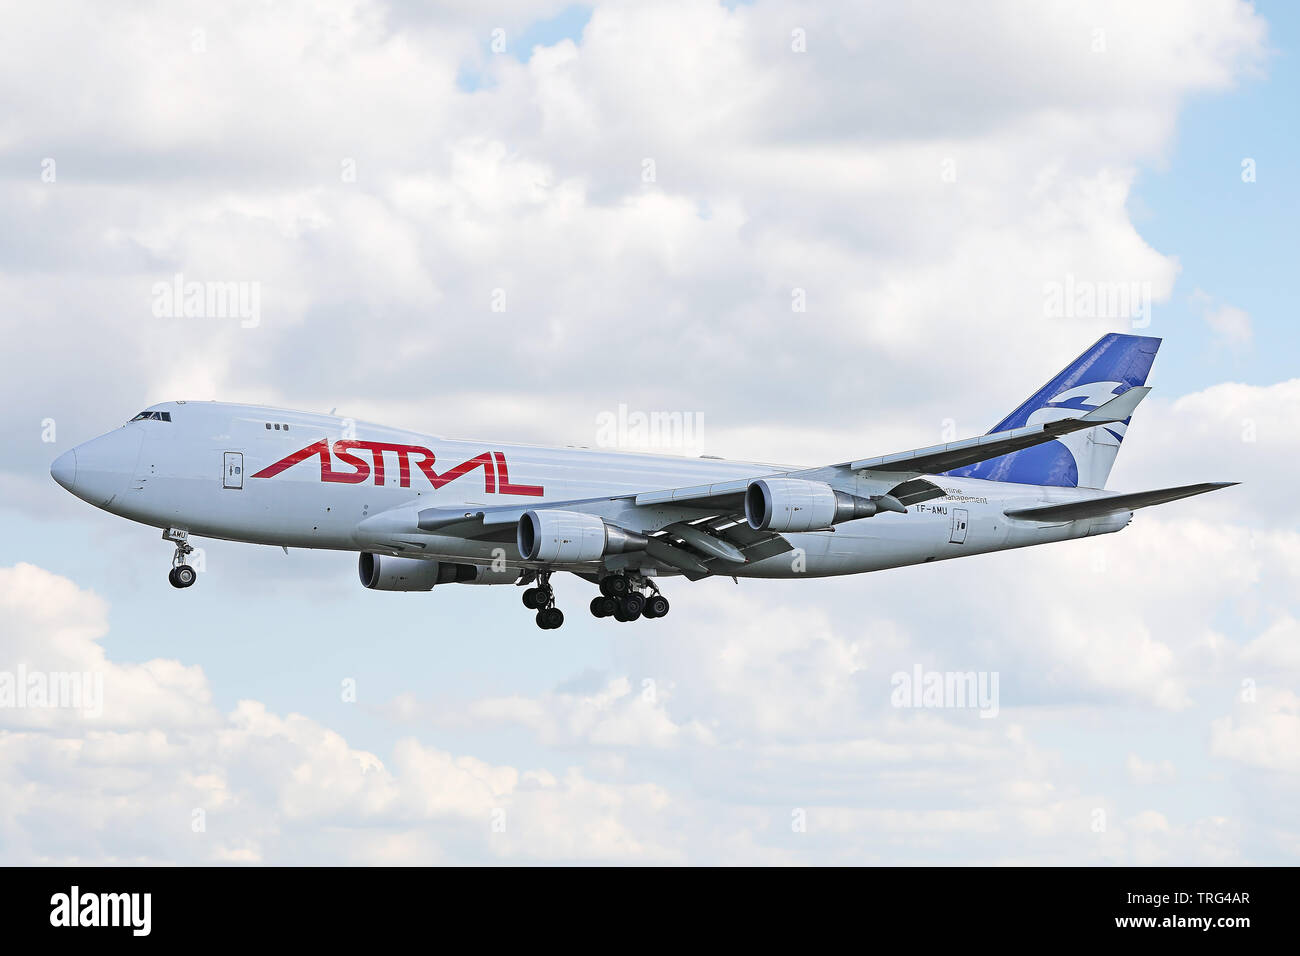 Astral Cargo Boeing 747-400F Stock Photo